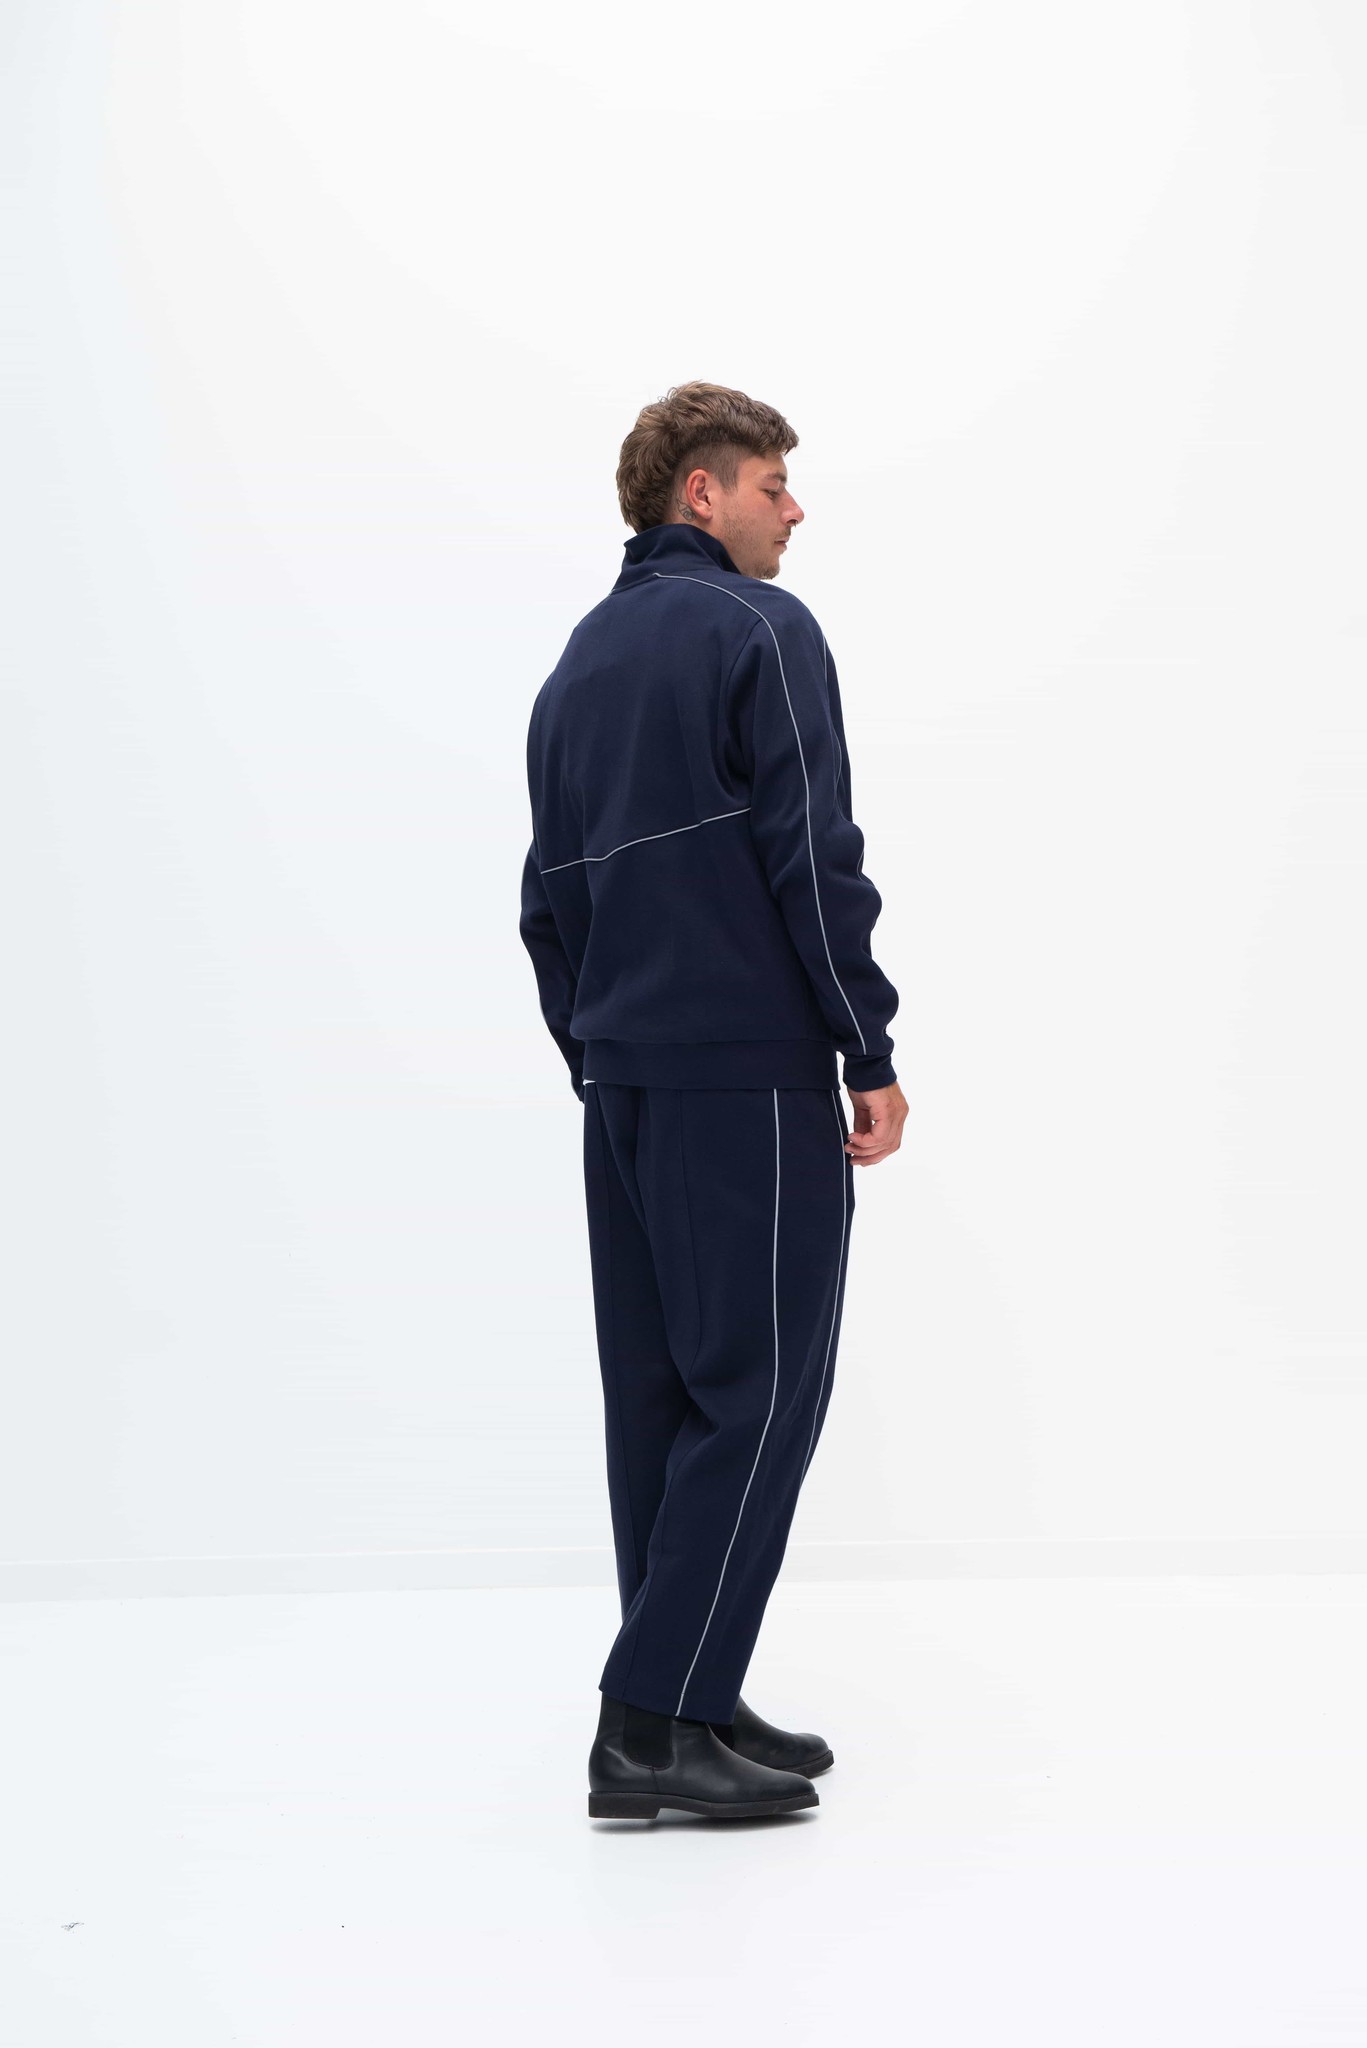 COUCH - New Amsterdam NAVY PANT Association Surf